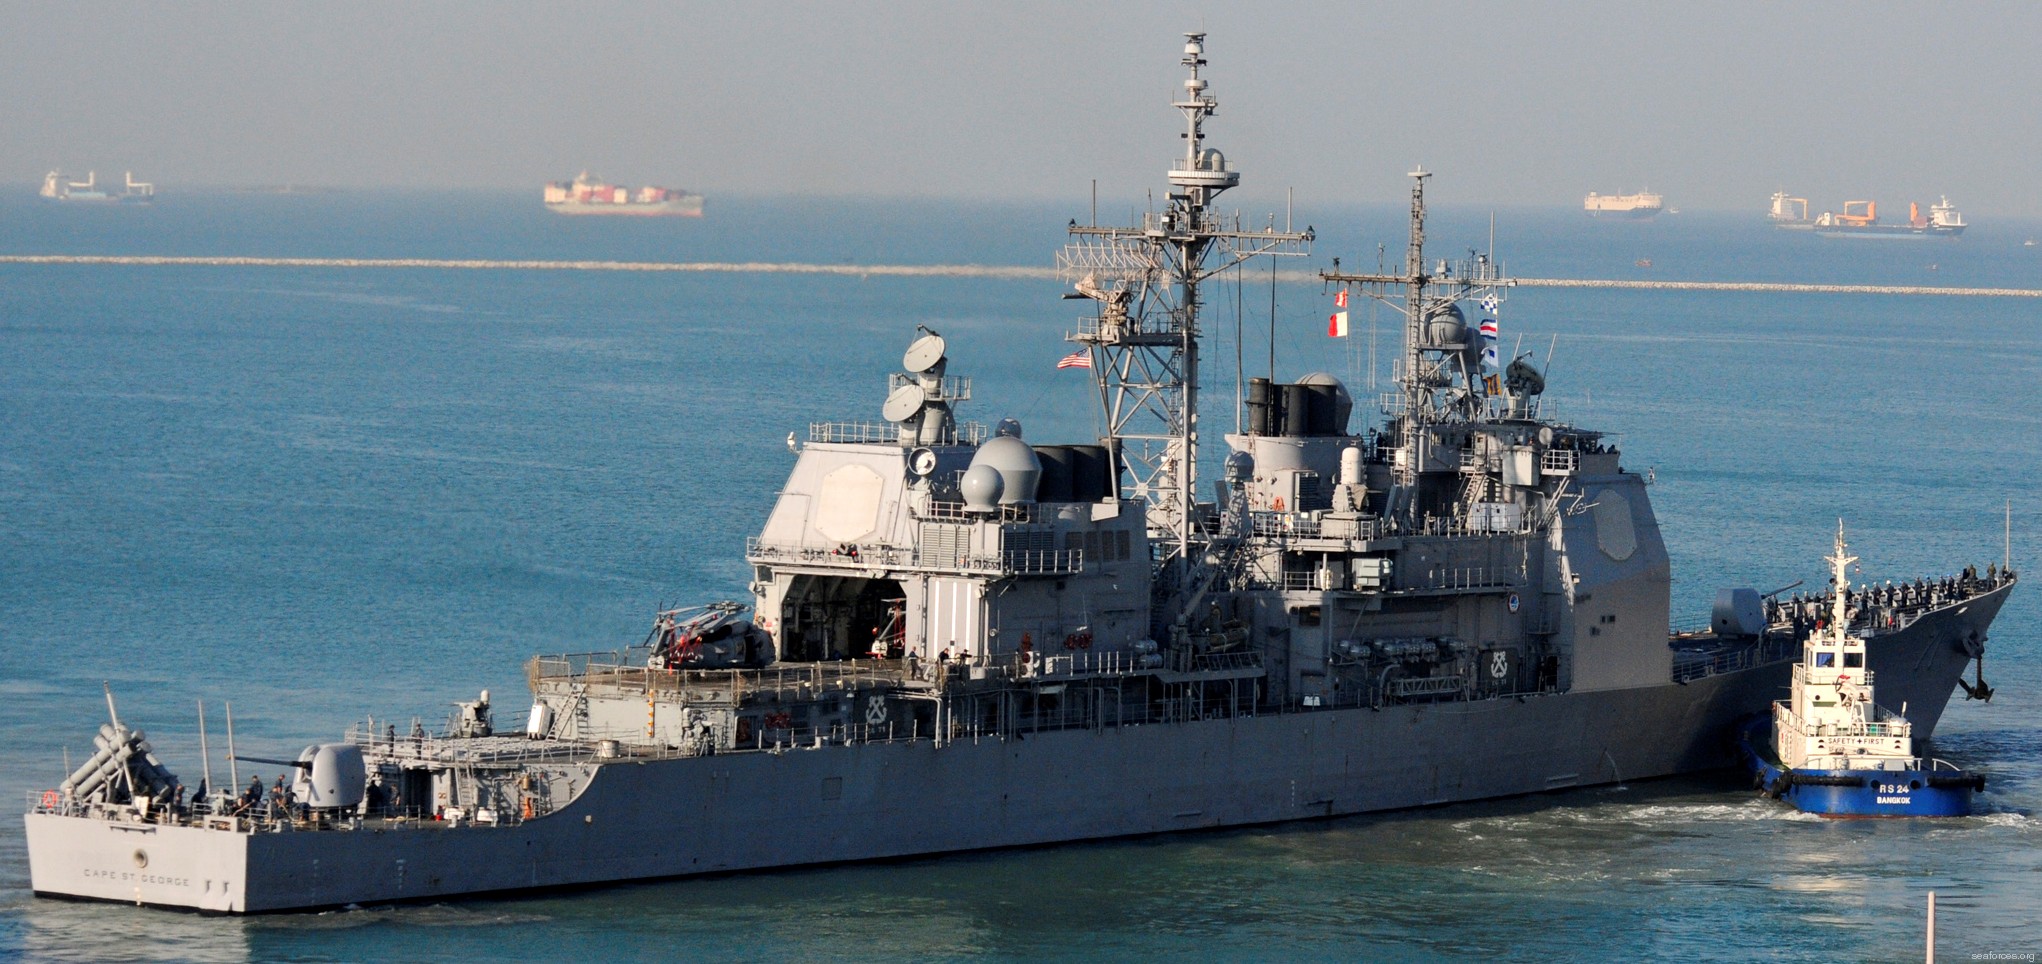 cg-71 uss cape st. george ticonderoga class guided missile cruiser us navy 40 laem chabang thailand